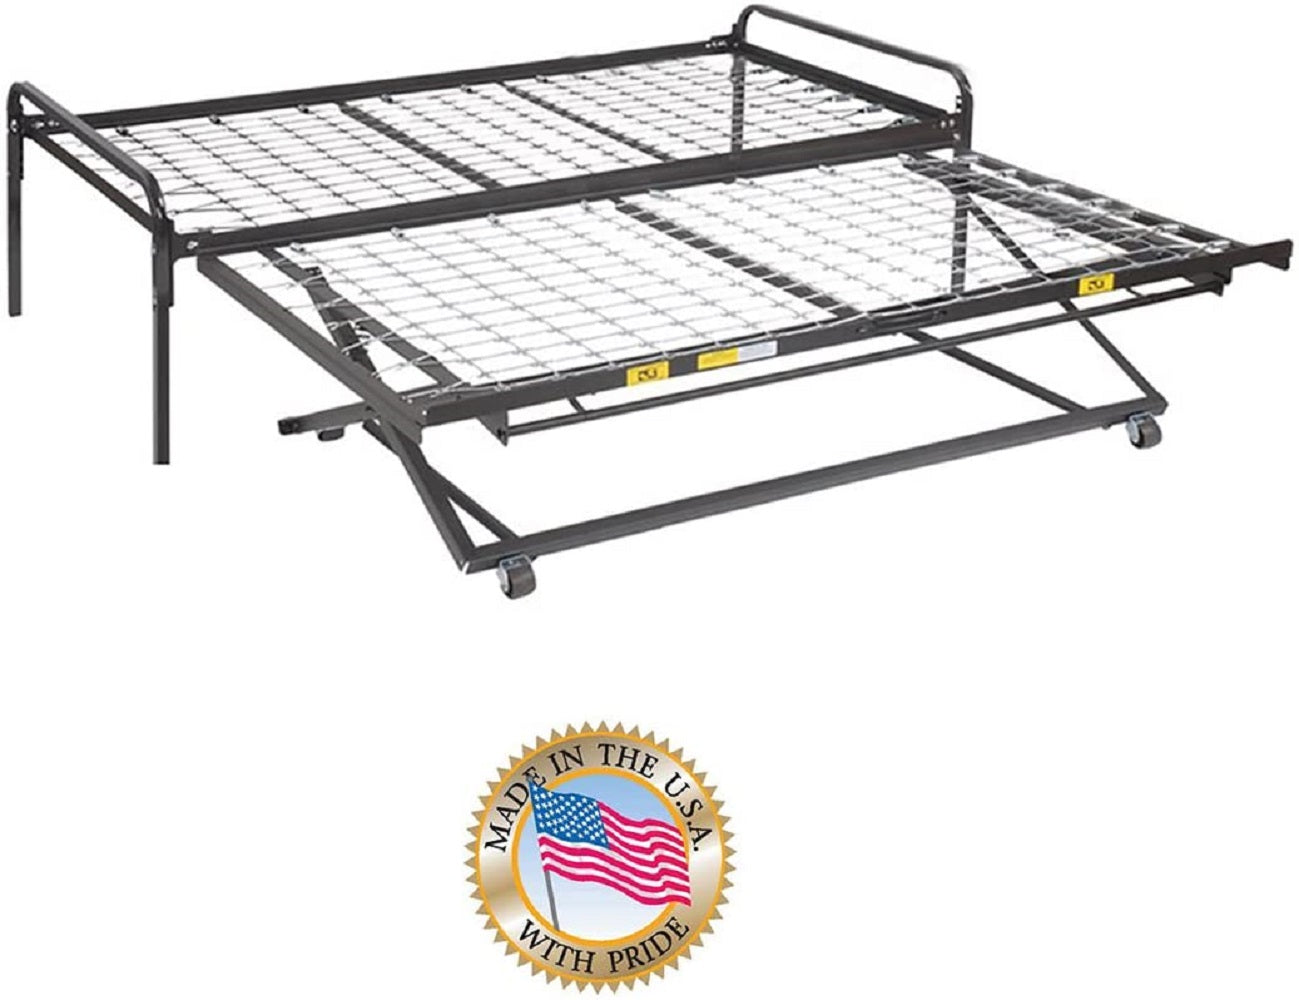 Twin Size Metal Day Bed (Daybed) Frame & Pop up Trundle with Great Firm Mattresses Included Package Deal!